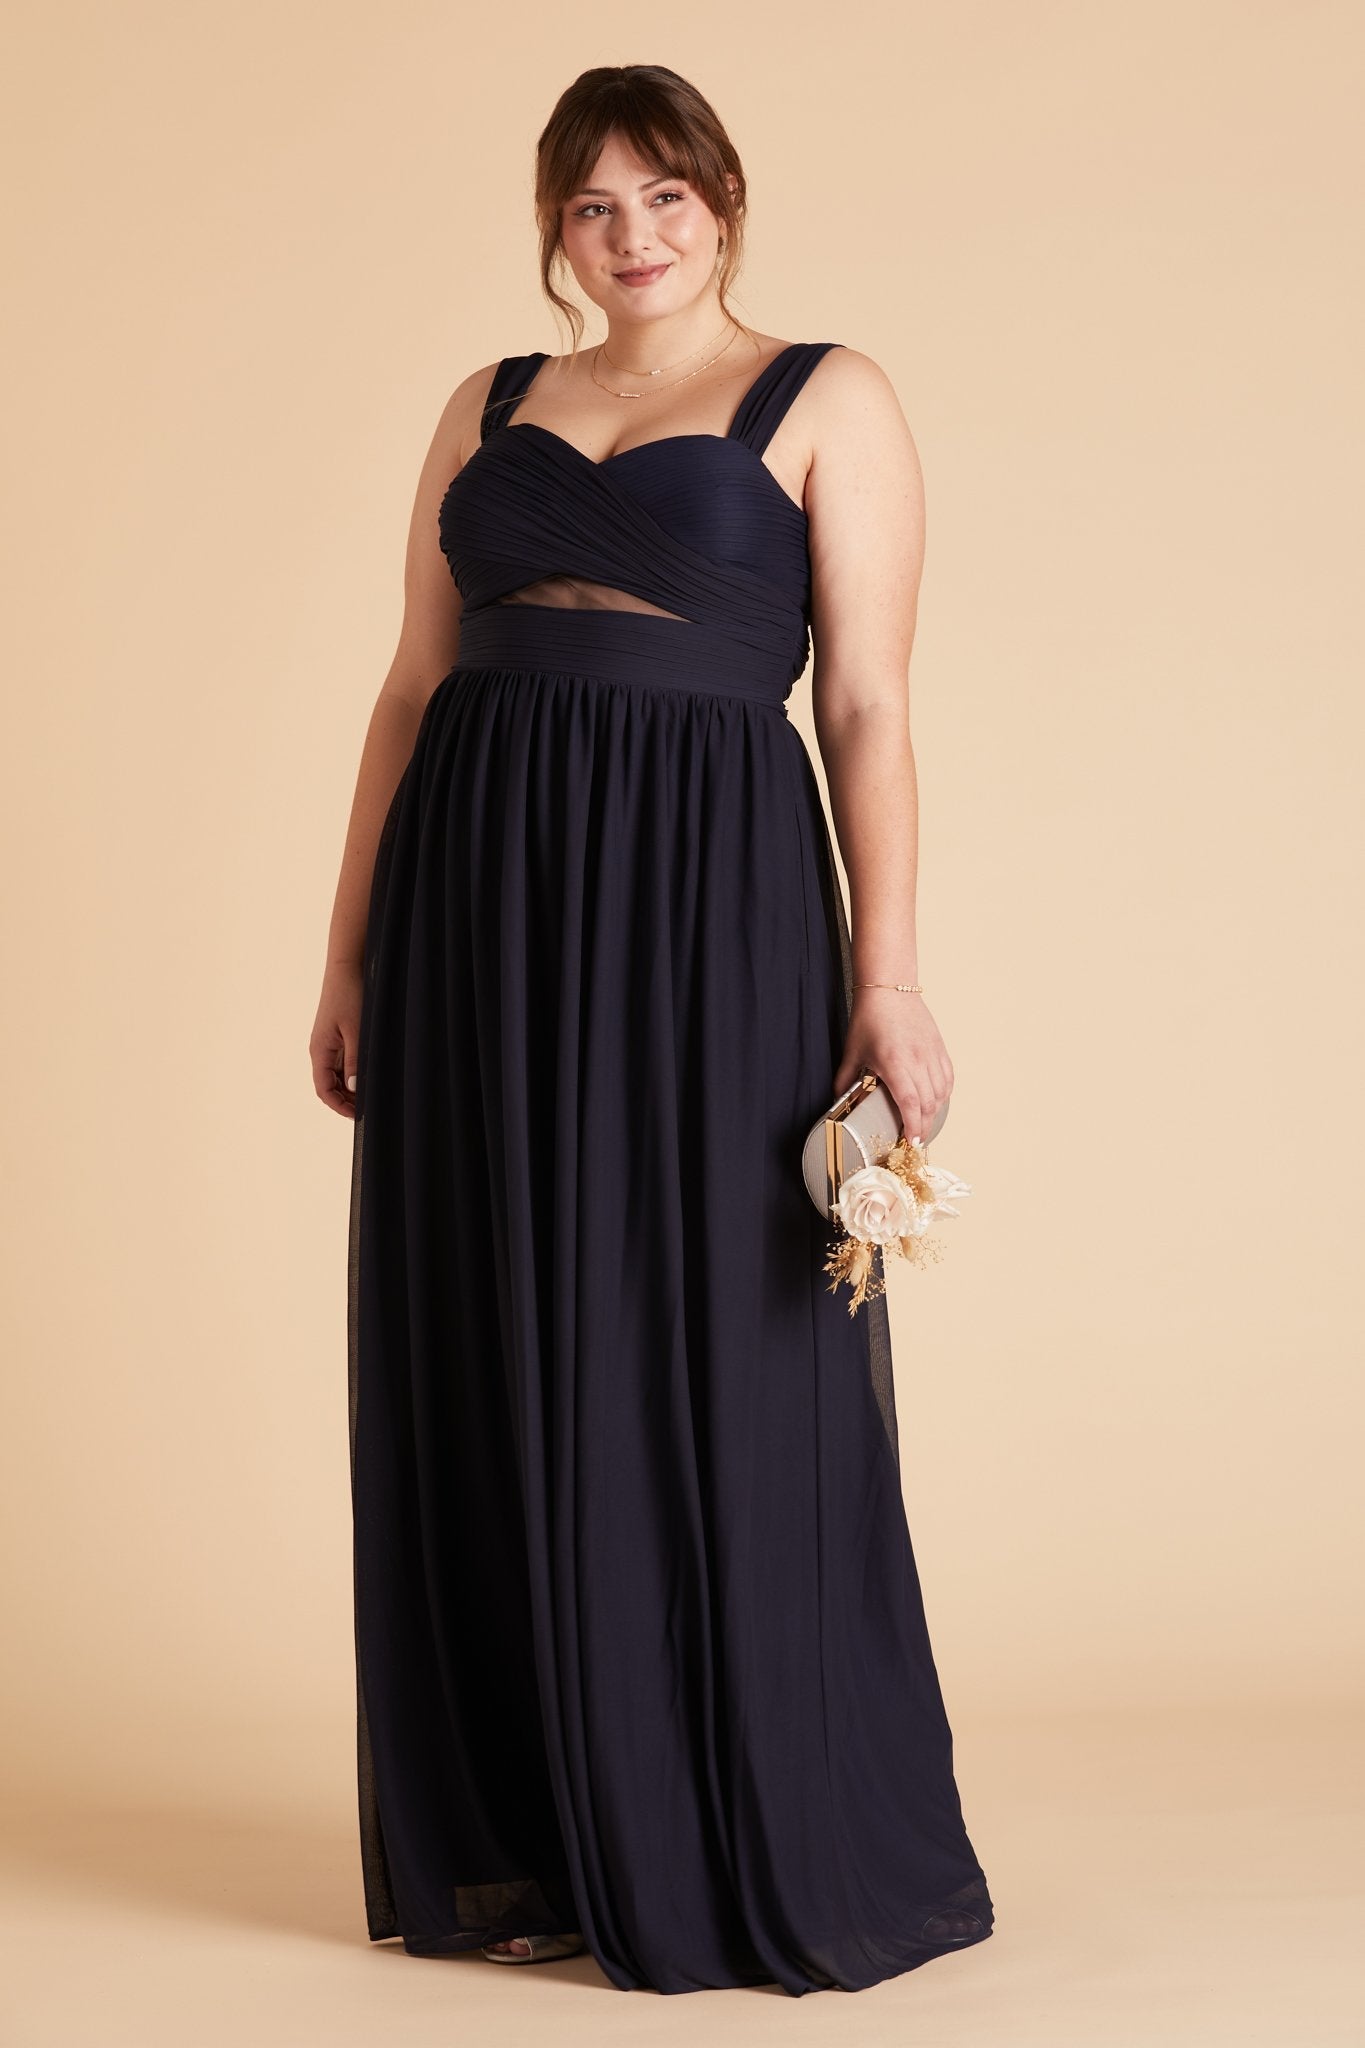 Elsye plus size bridesmaid dress in navy blue chiffon by Birdy Grey, front view